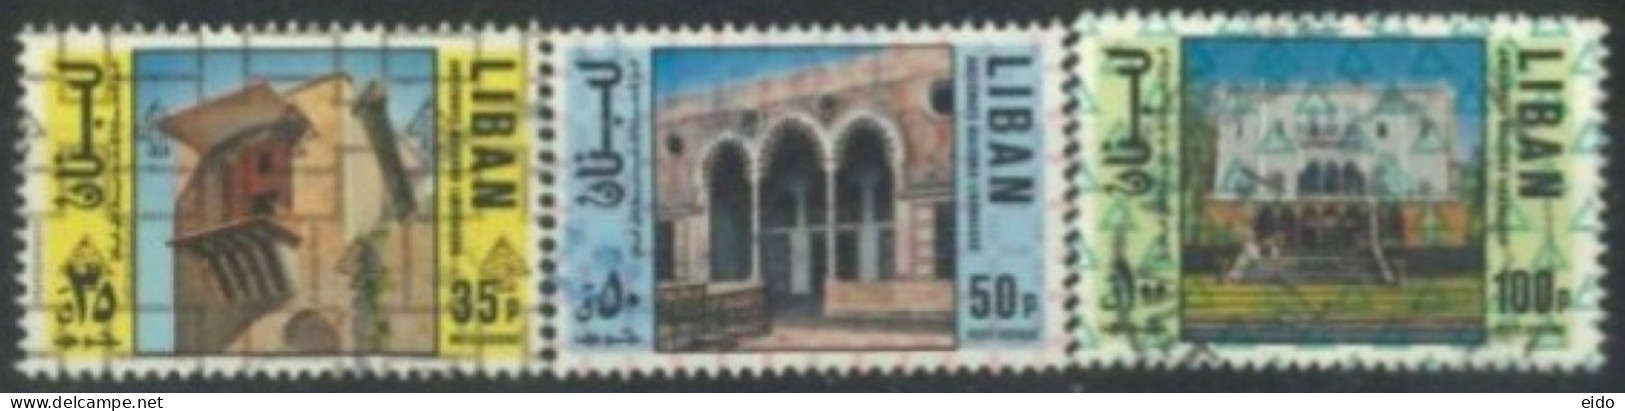 LEBANON. 1978, LEBANESE DOMESTIC ARCHITECTURE STAMPS ISSUES OF 1973 SURCHARG, COMPLETE SET OF 4, SG #1243/45 USED, - Lebanon